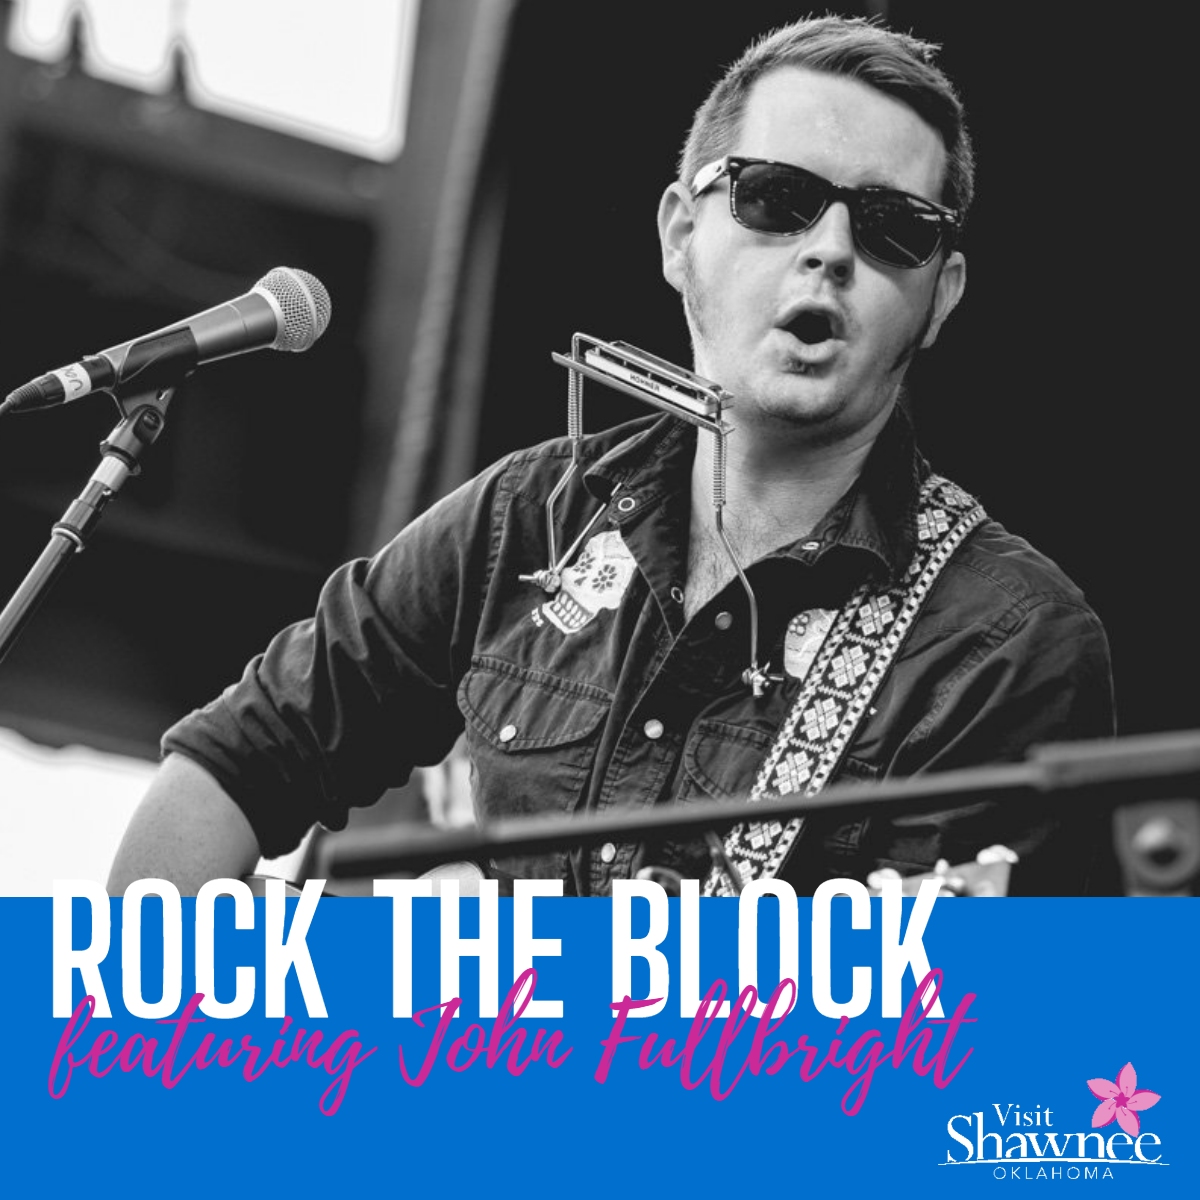 Next week, join us in Downtown #ShawneeOK as we Rock The Block. The block party will have artisan vendors, inflatables, kids activities, giveaways, food trucks & more including a live concert by @johnrfullbright Fri, May 19 5:50-8p. Grab a hotel room and make a weekend of it!